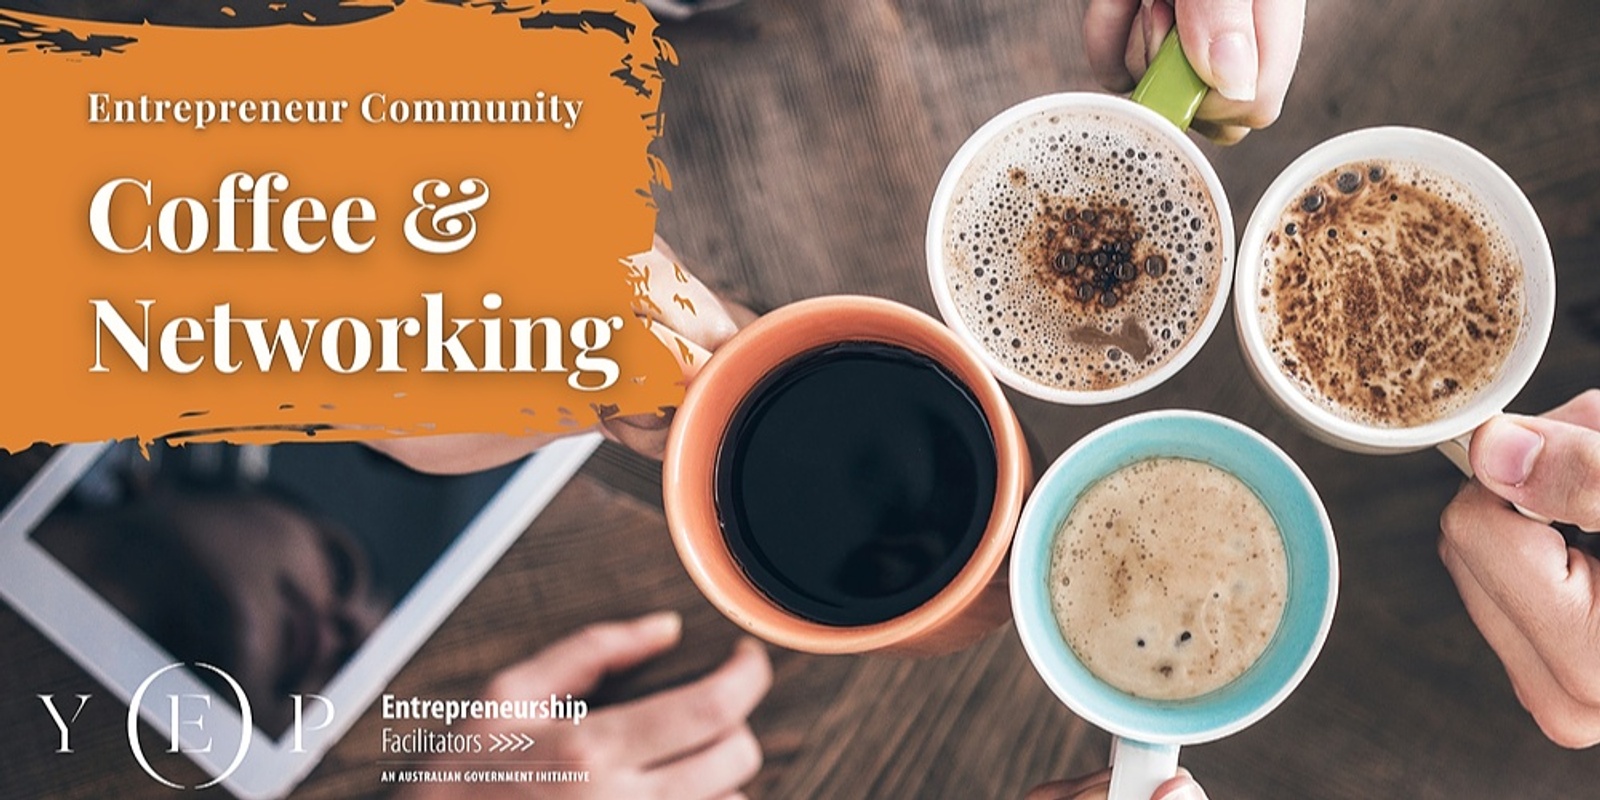 Banner image for October Entrepreneur Community Coffee & Networking